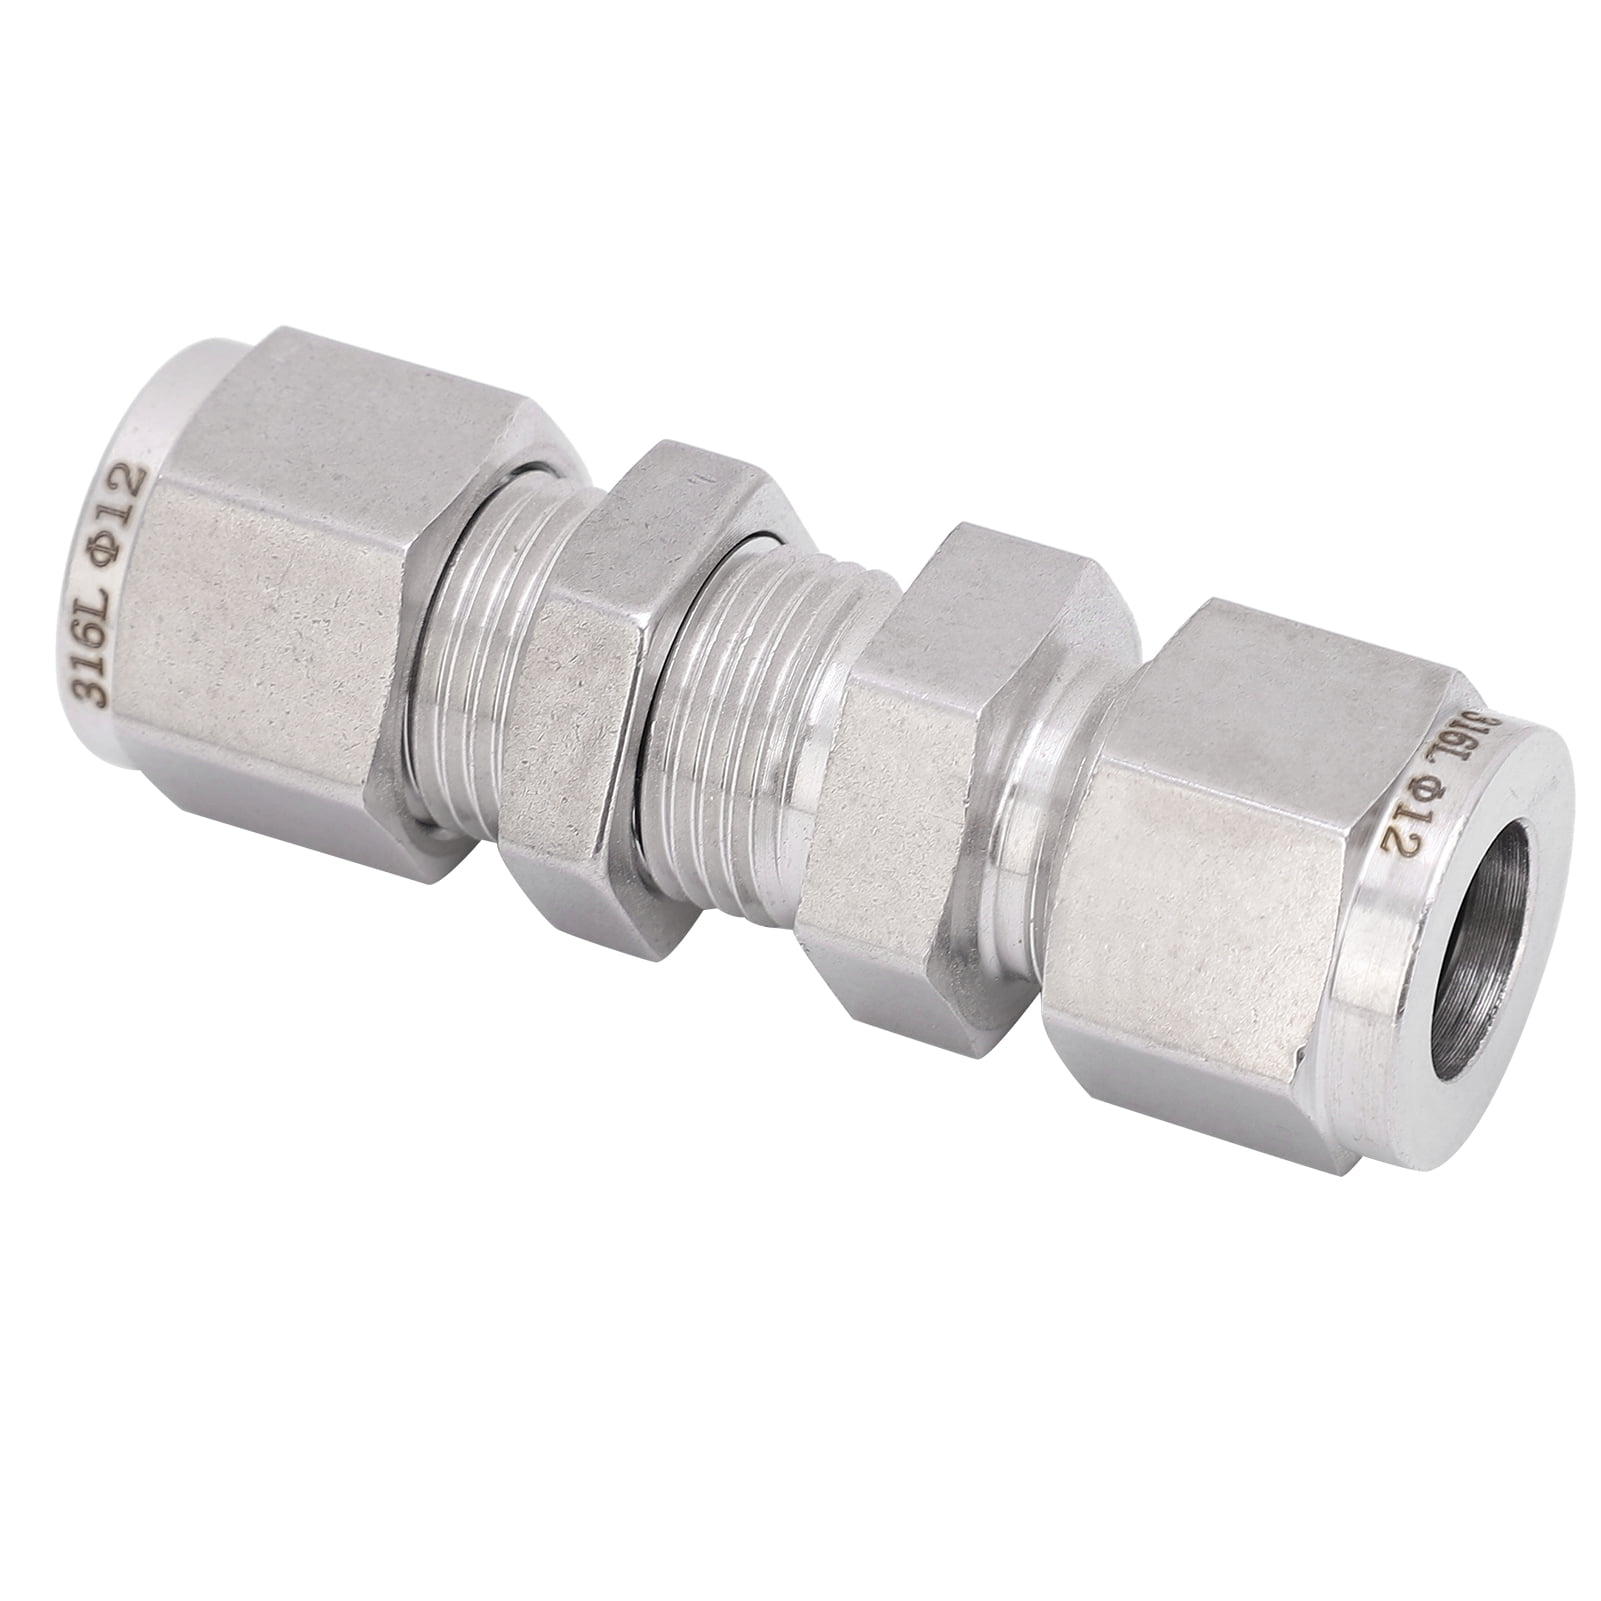 316 Stainless Steel Double Ferrule Compression Fitting Bulkhead Connector Accessory for Water Pipes Gas Pipes and Oil Pipes Ф12